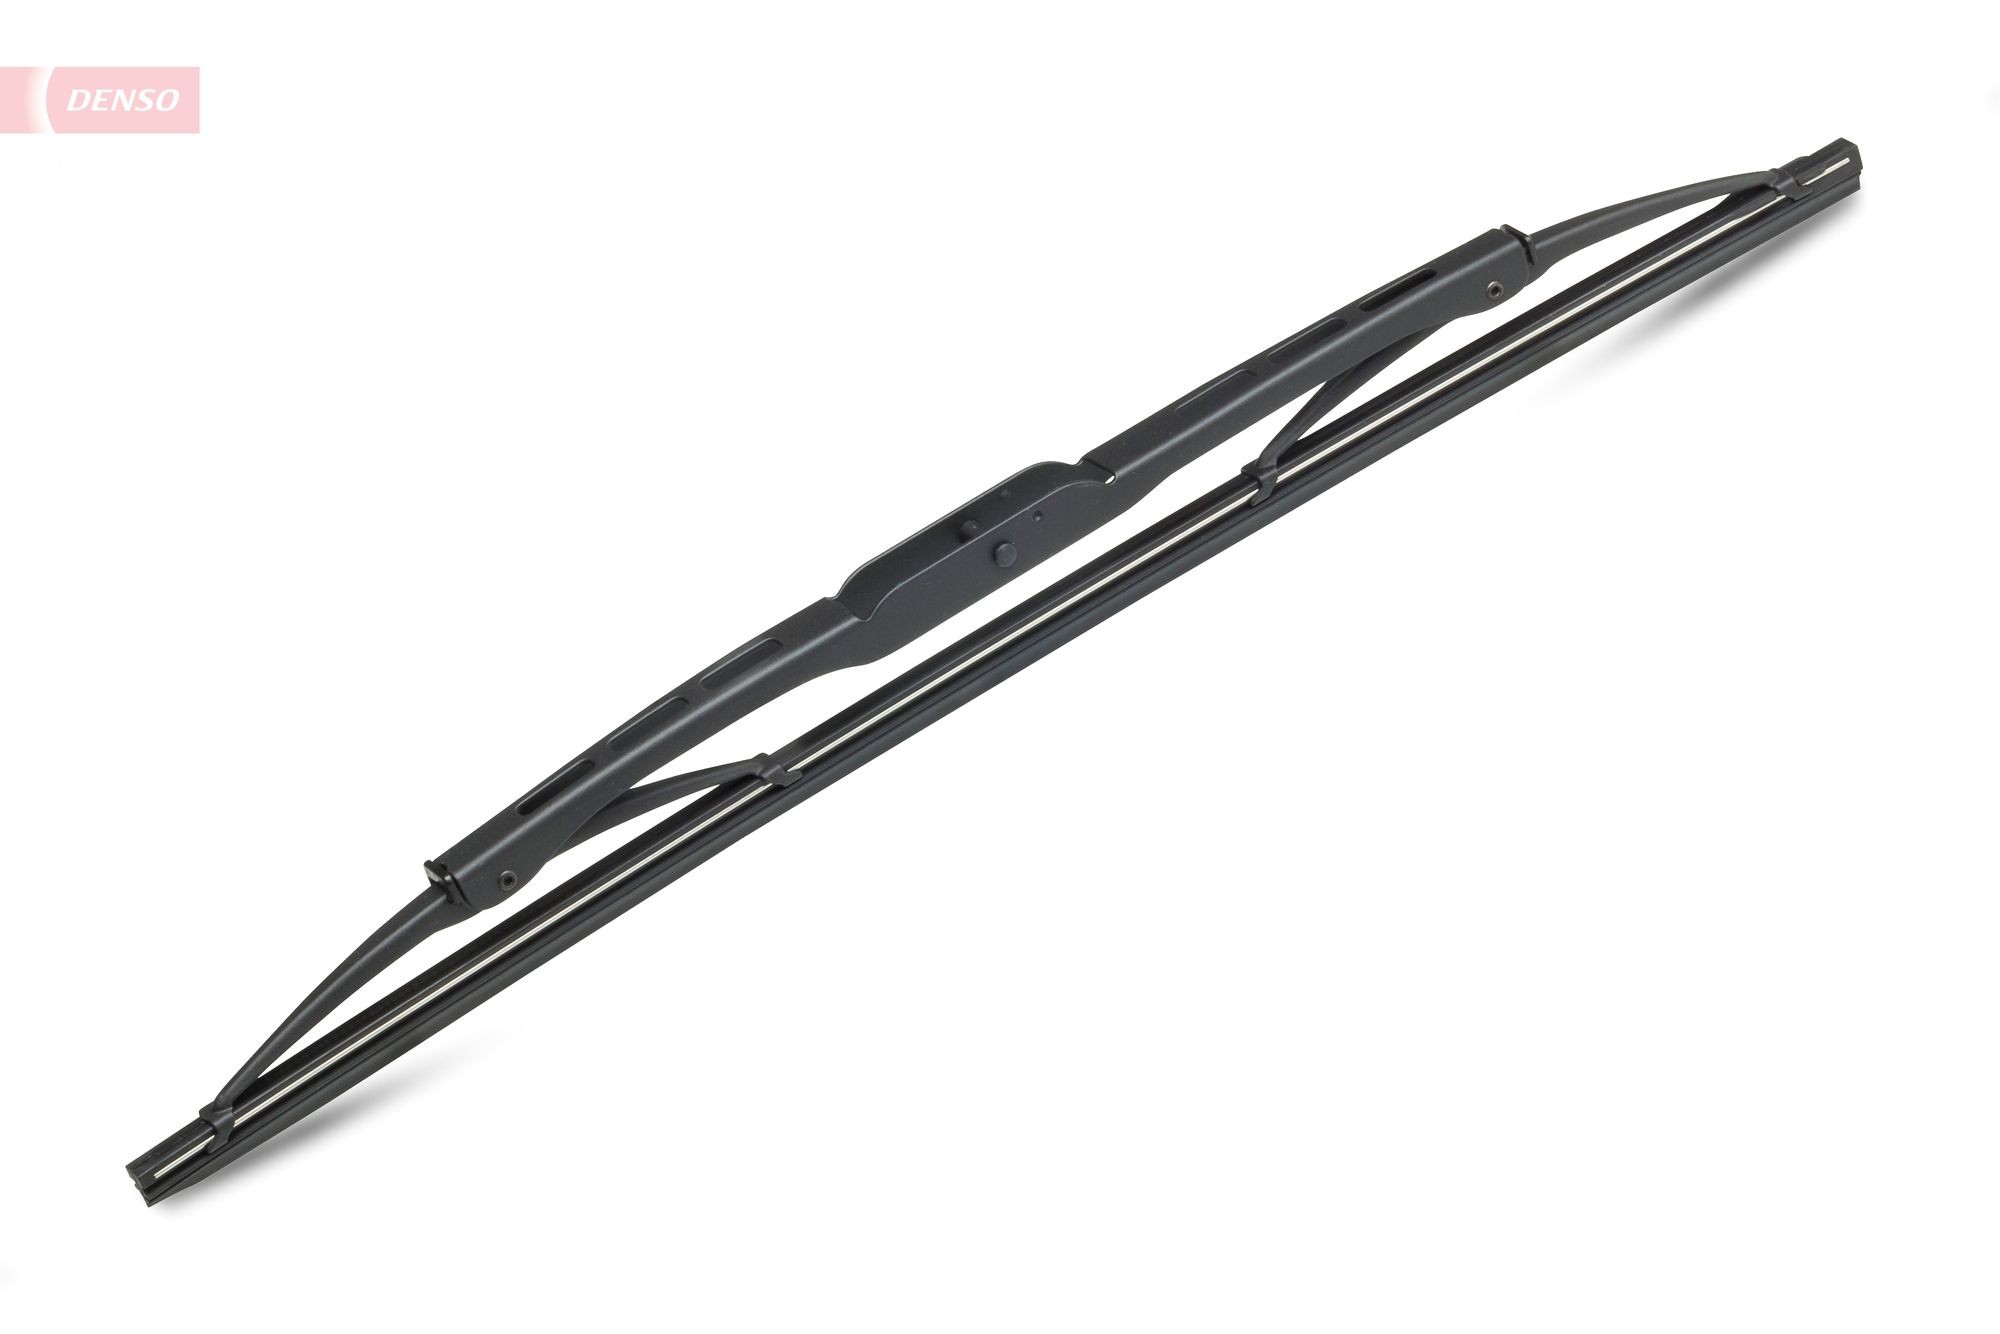 DENSO Wipers rear and front Passat 3b5 new DM-038